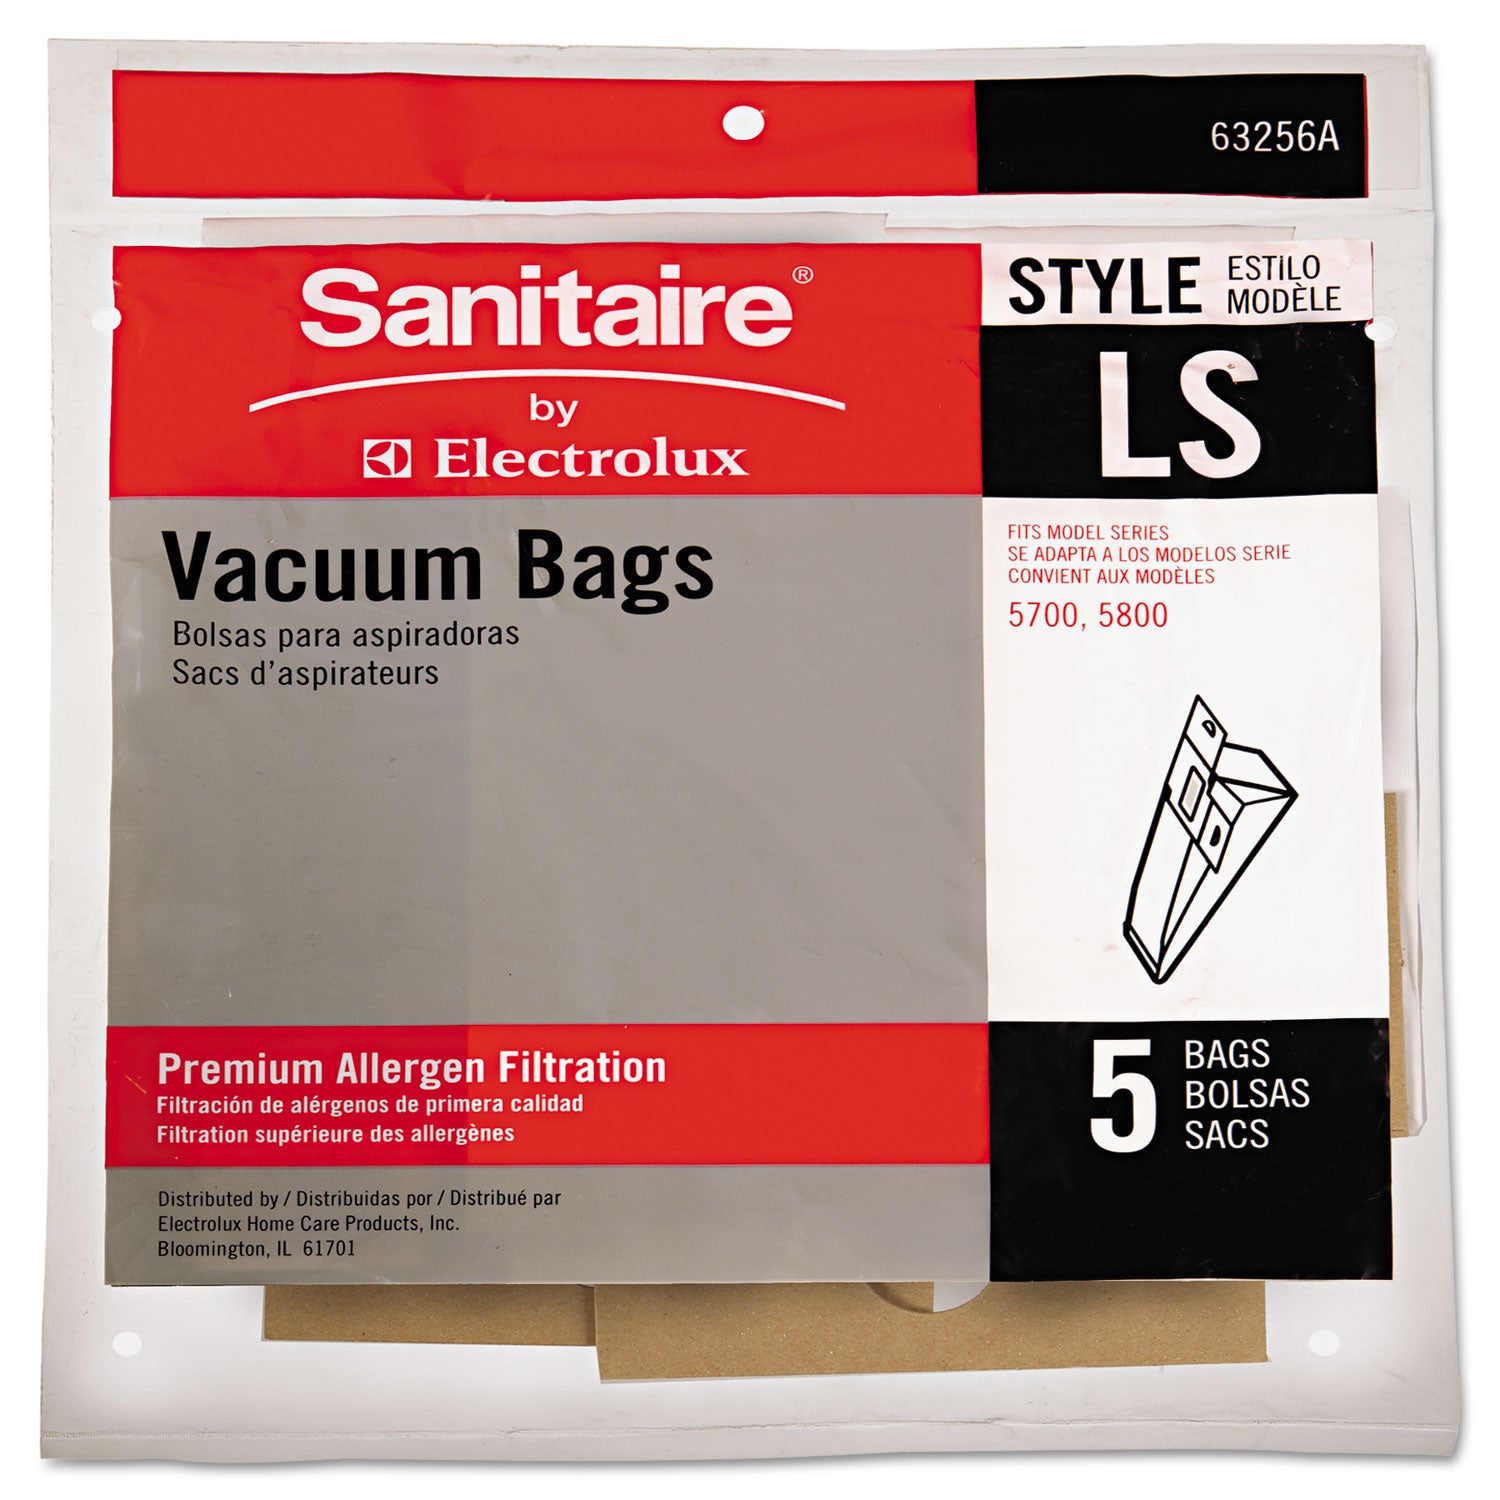 commercial-upright-vacuum-cleaner-replacement-bags-style-ls-5-pack-10-packs-carton_eur63256a10ct - 1